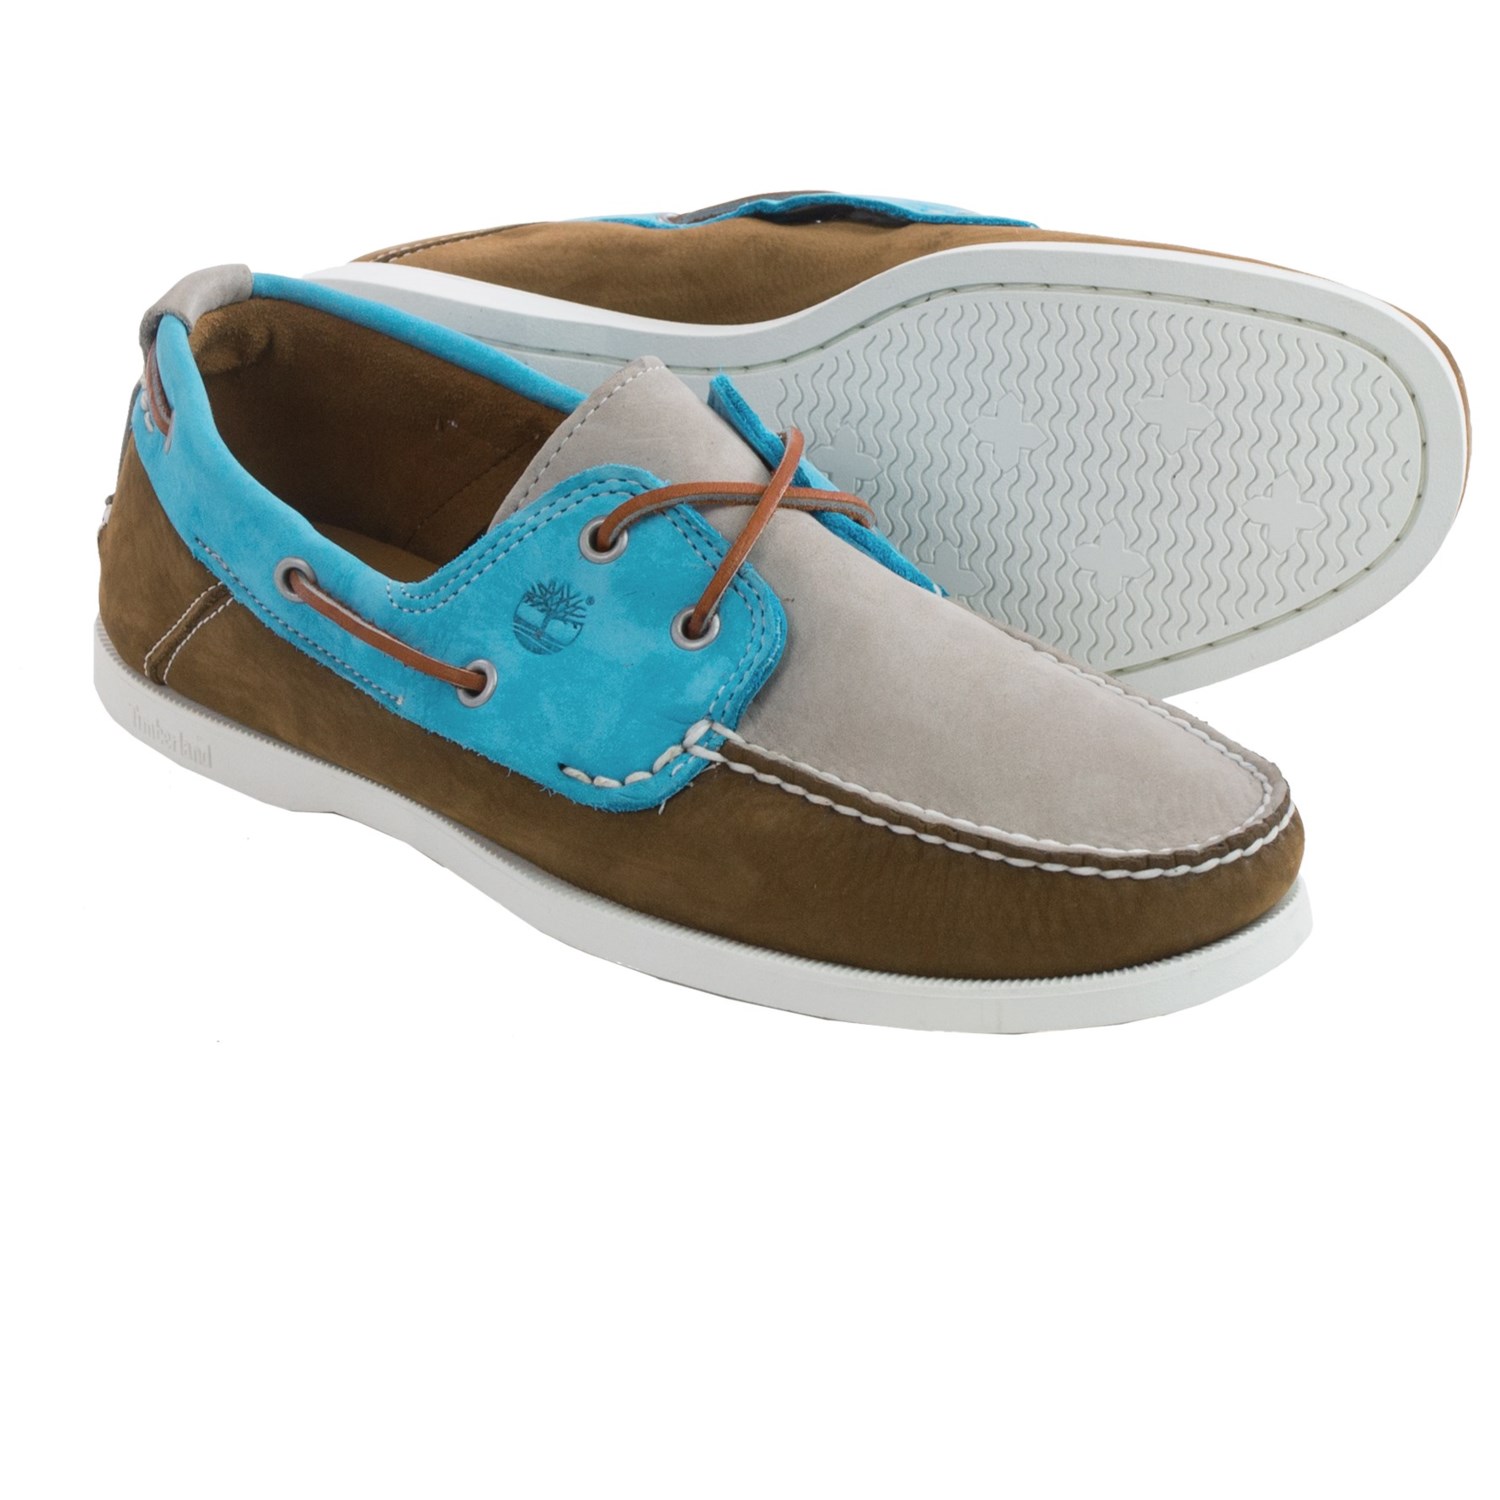 Timberland Heritage CW 2-Eye Boat Shoes – Nubuck (For Men)